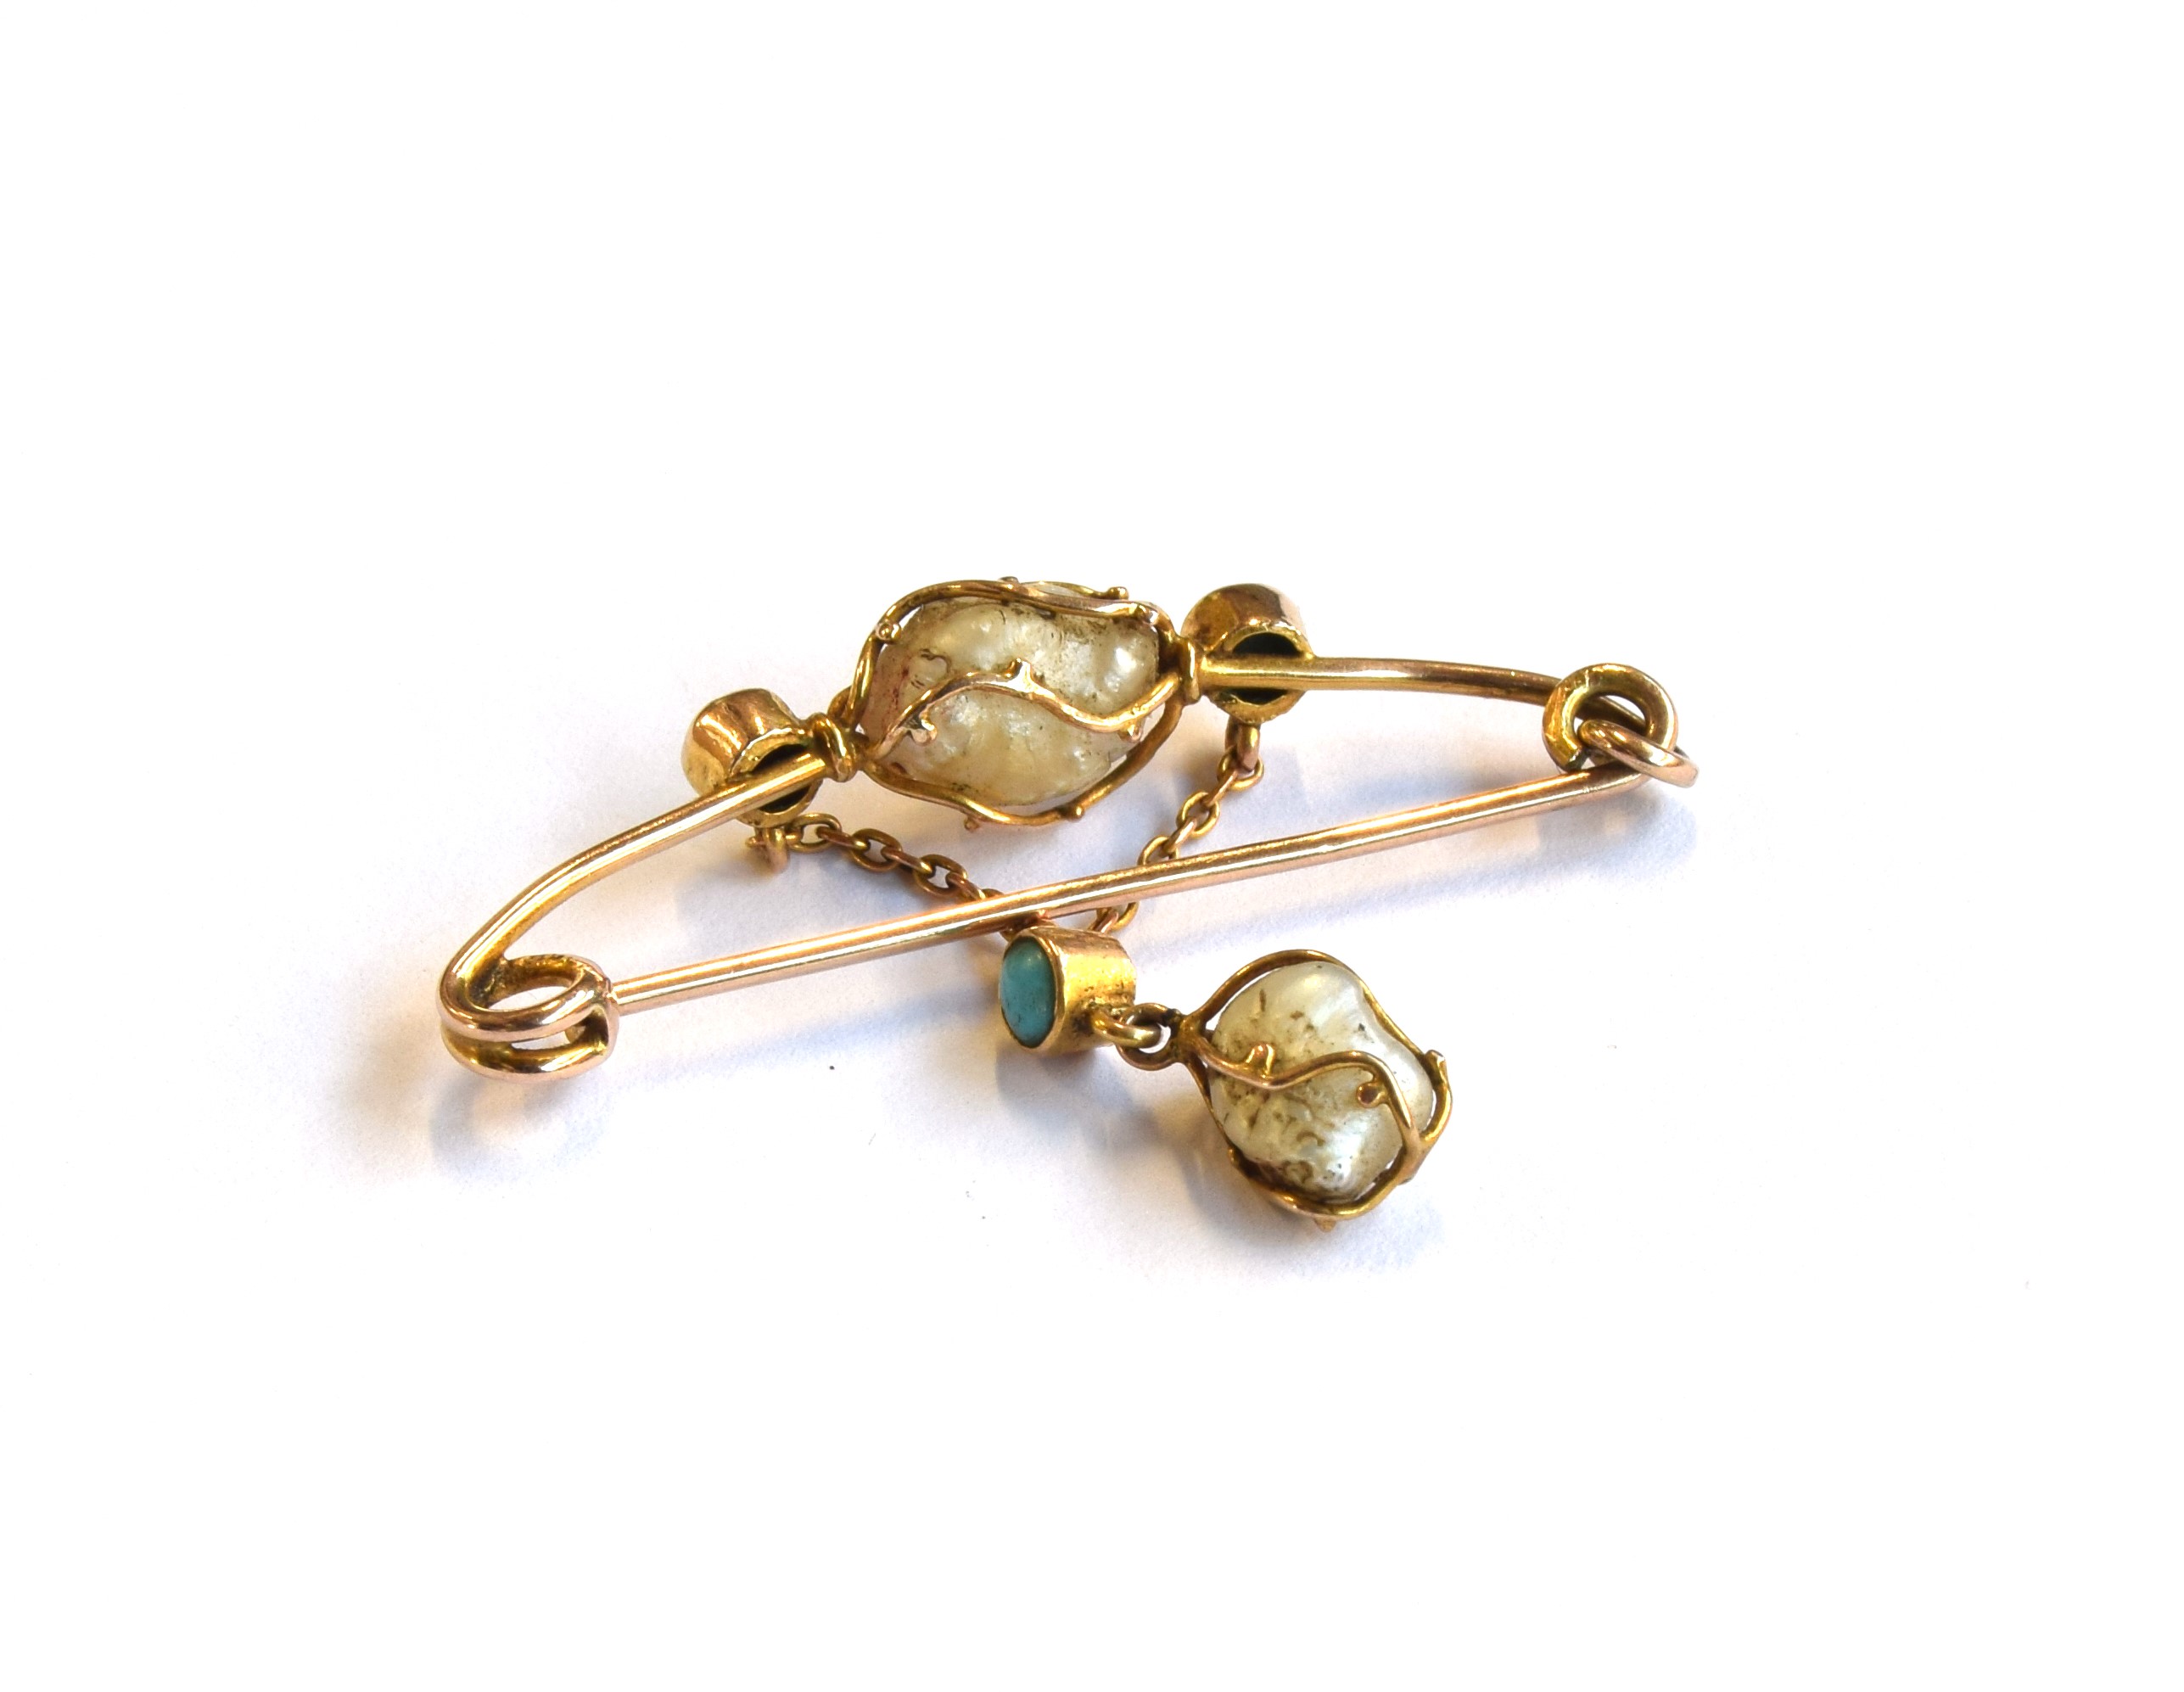 An Art Nouveau Murrle Bennett & Co. 9ct gold, turquoise and baroque pearl wire work lavalier brooch, - Image 2 of 2